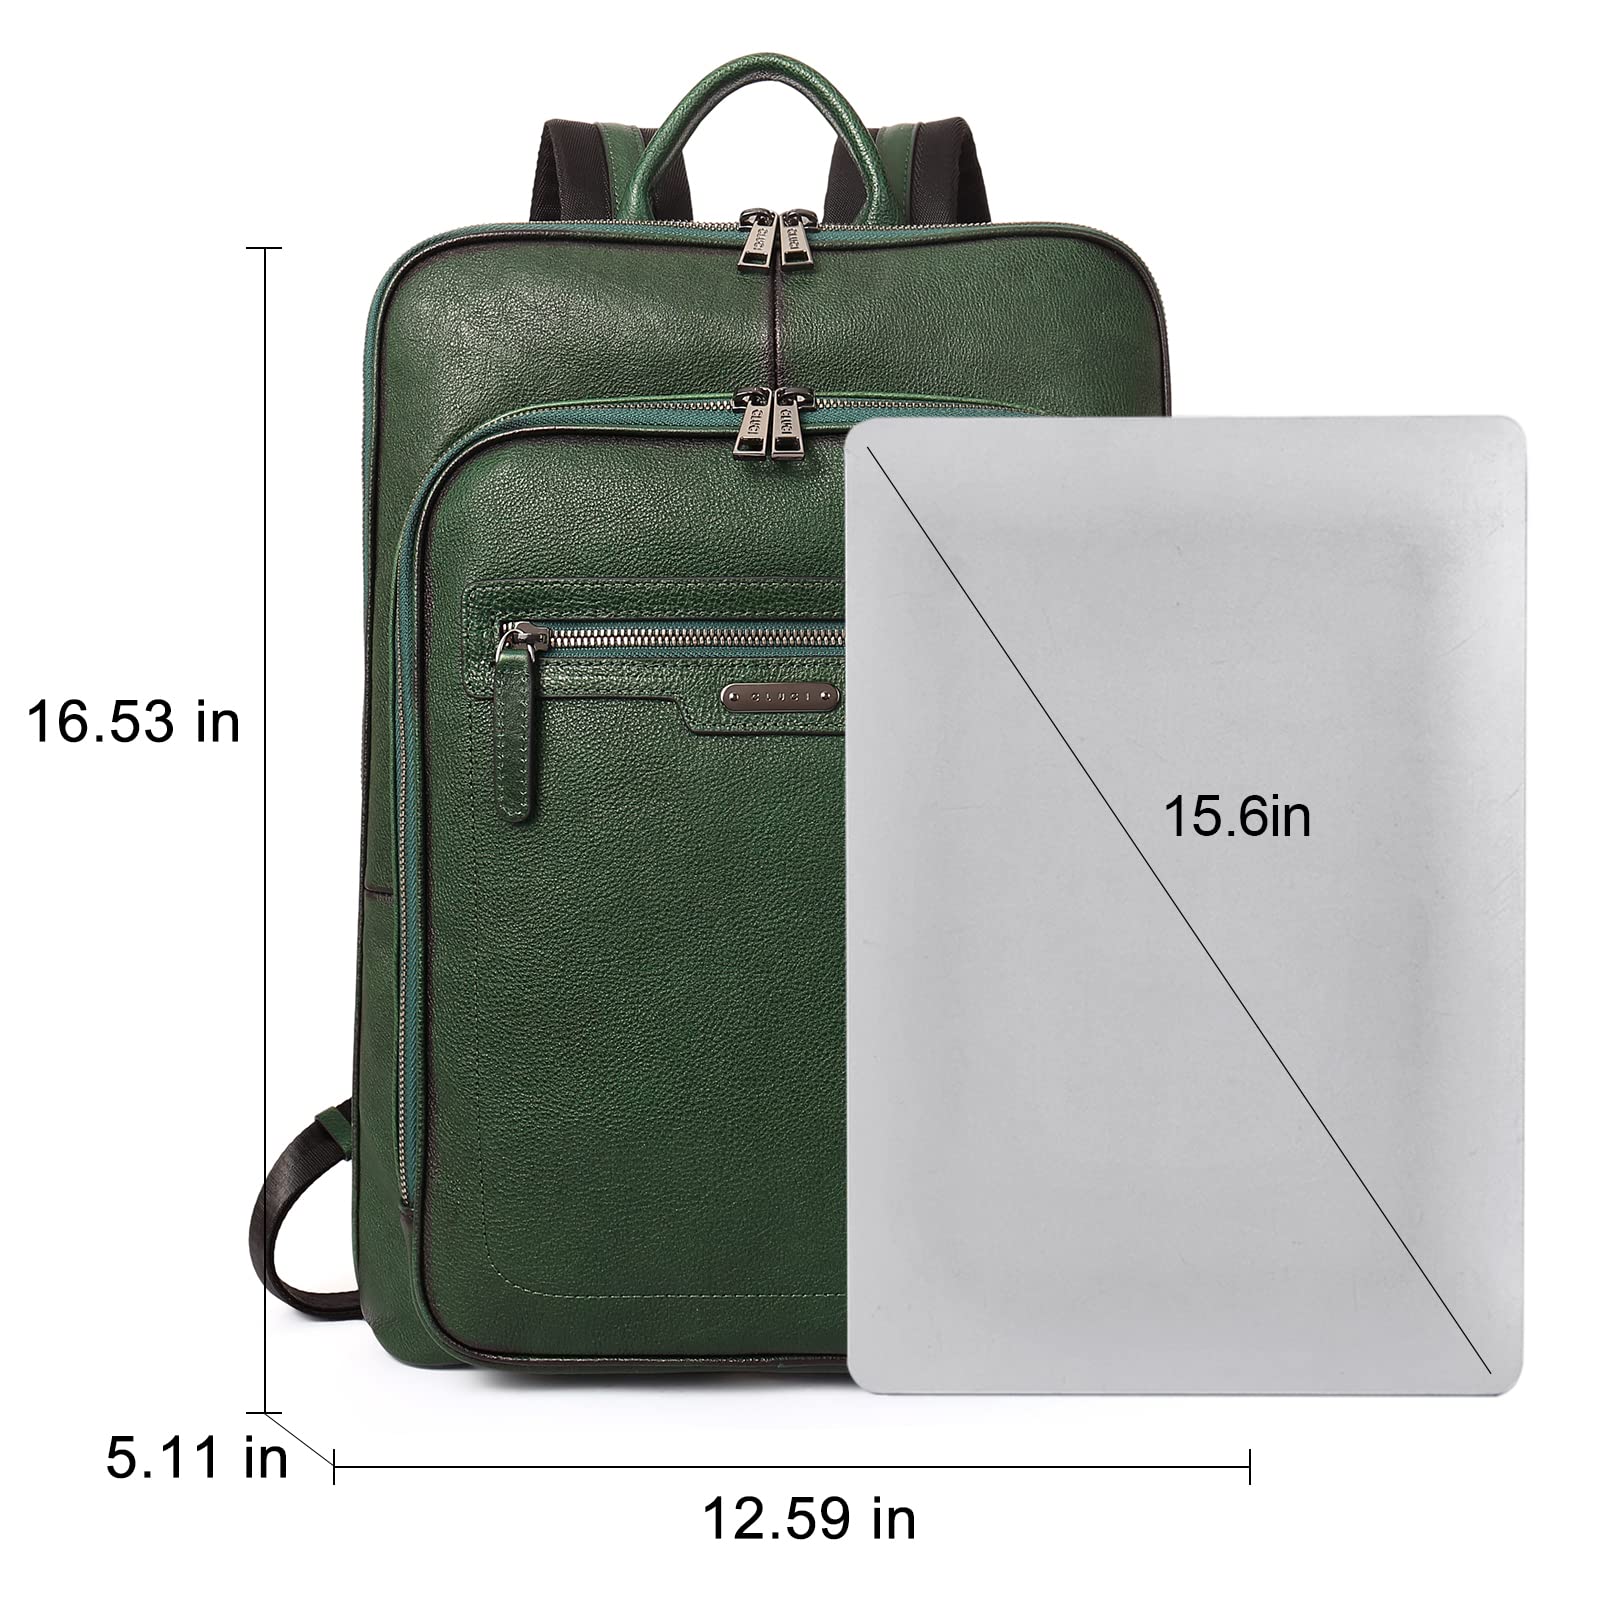 CLUCI Vegetable Tanned Full Grain Leather 15.6 inch Laptop Backpack Purse for Women Casual Daypack Travel Backpack Sassafras Green